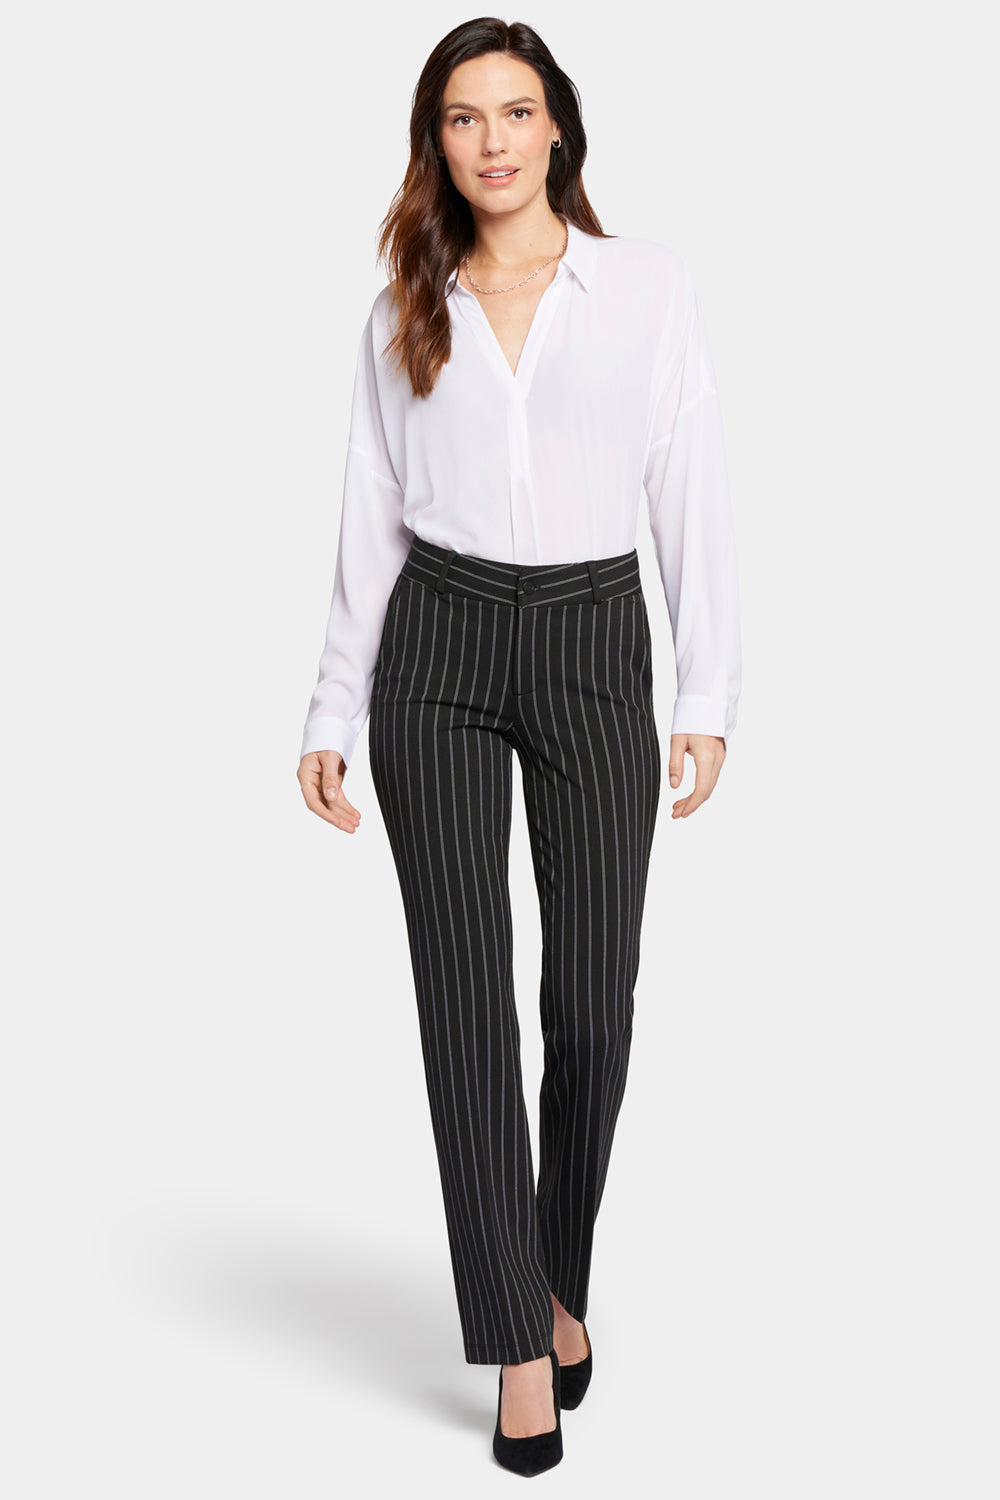 NYDJ Classic Trouser Pants Sculpt-Her™ Collection - Provo Stripe